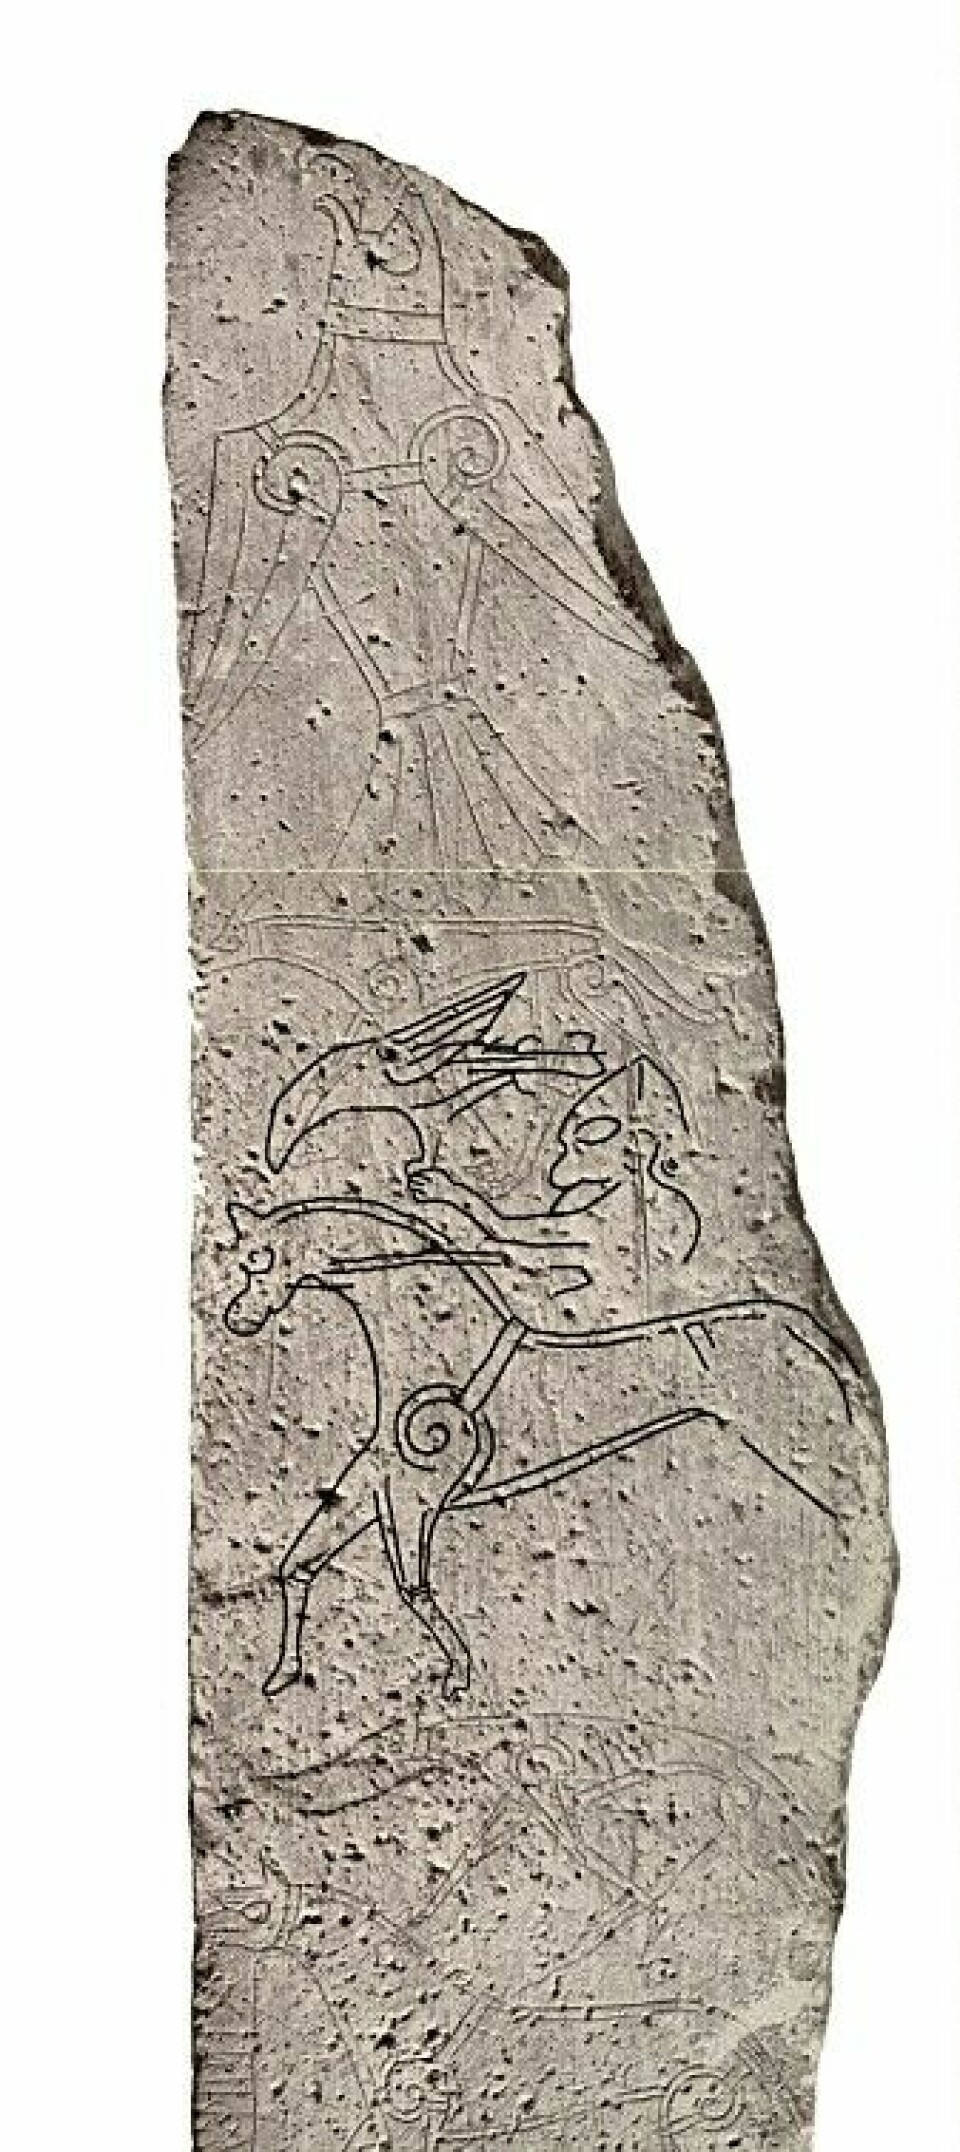 Alstadsteinen runestone is richly decorated – and only part of it is highlighted in black in this photo.